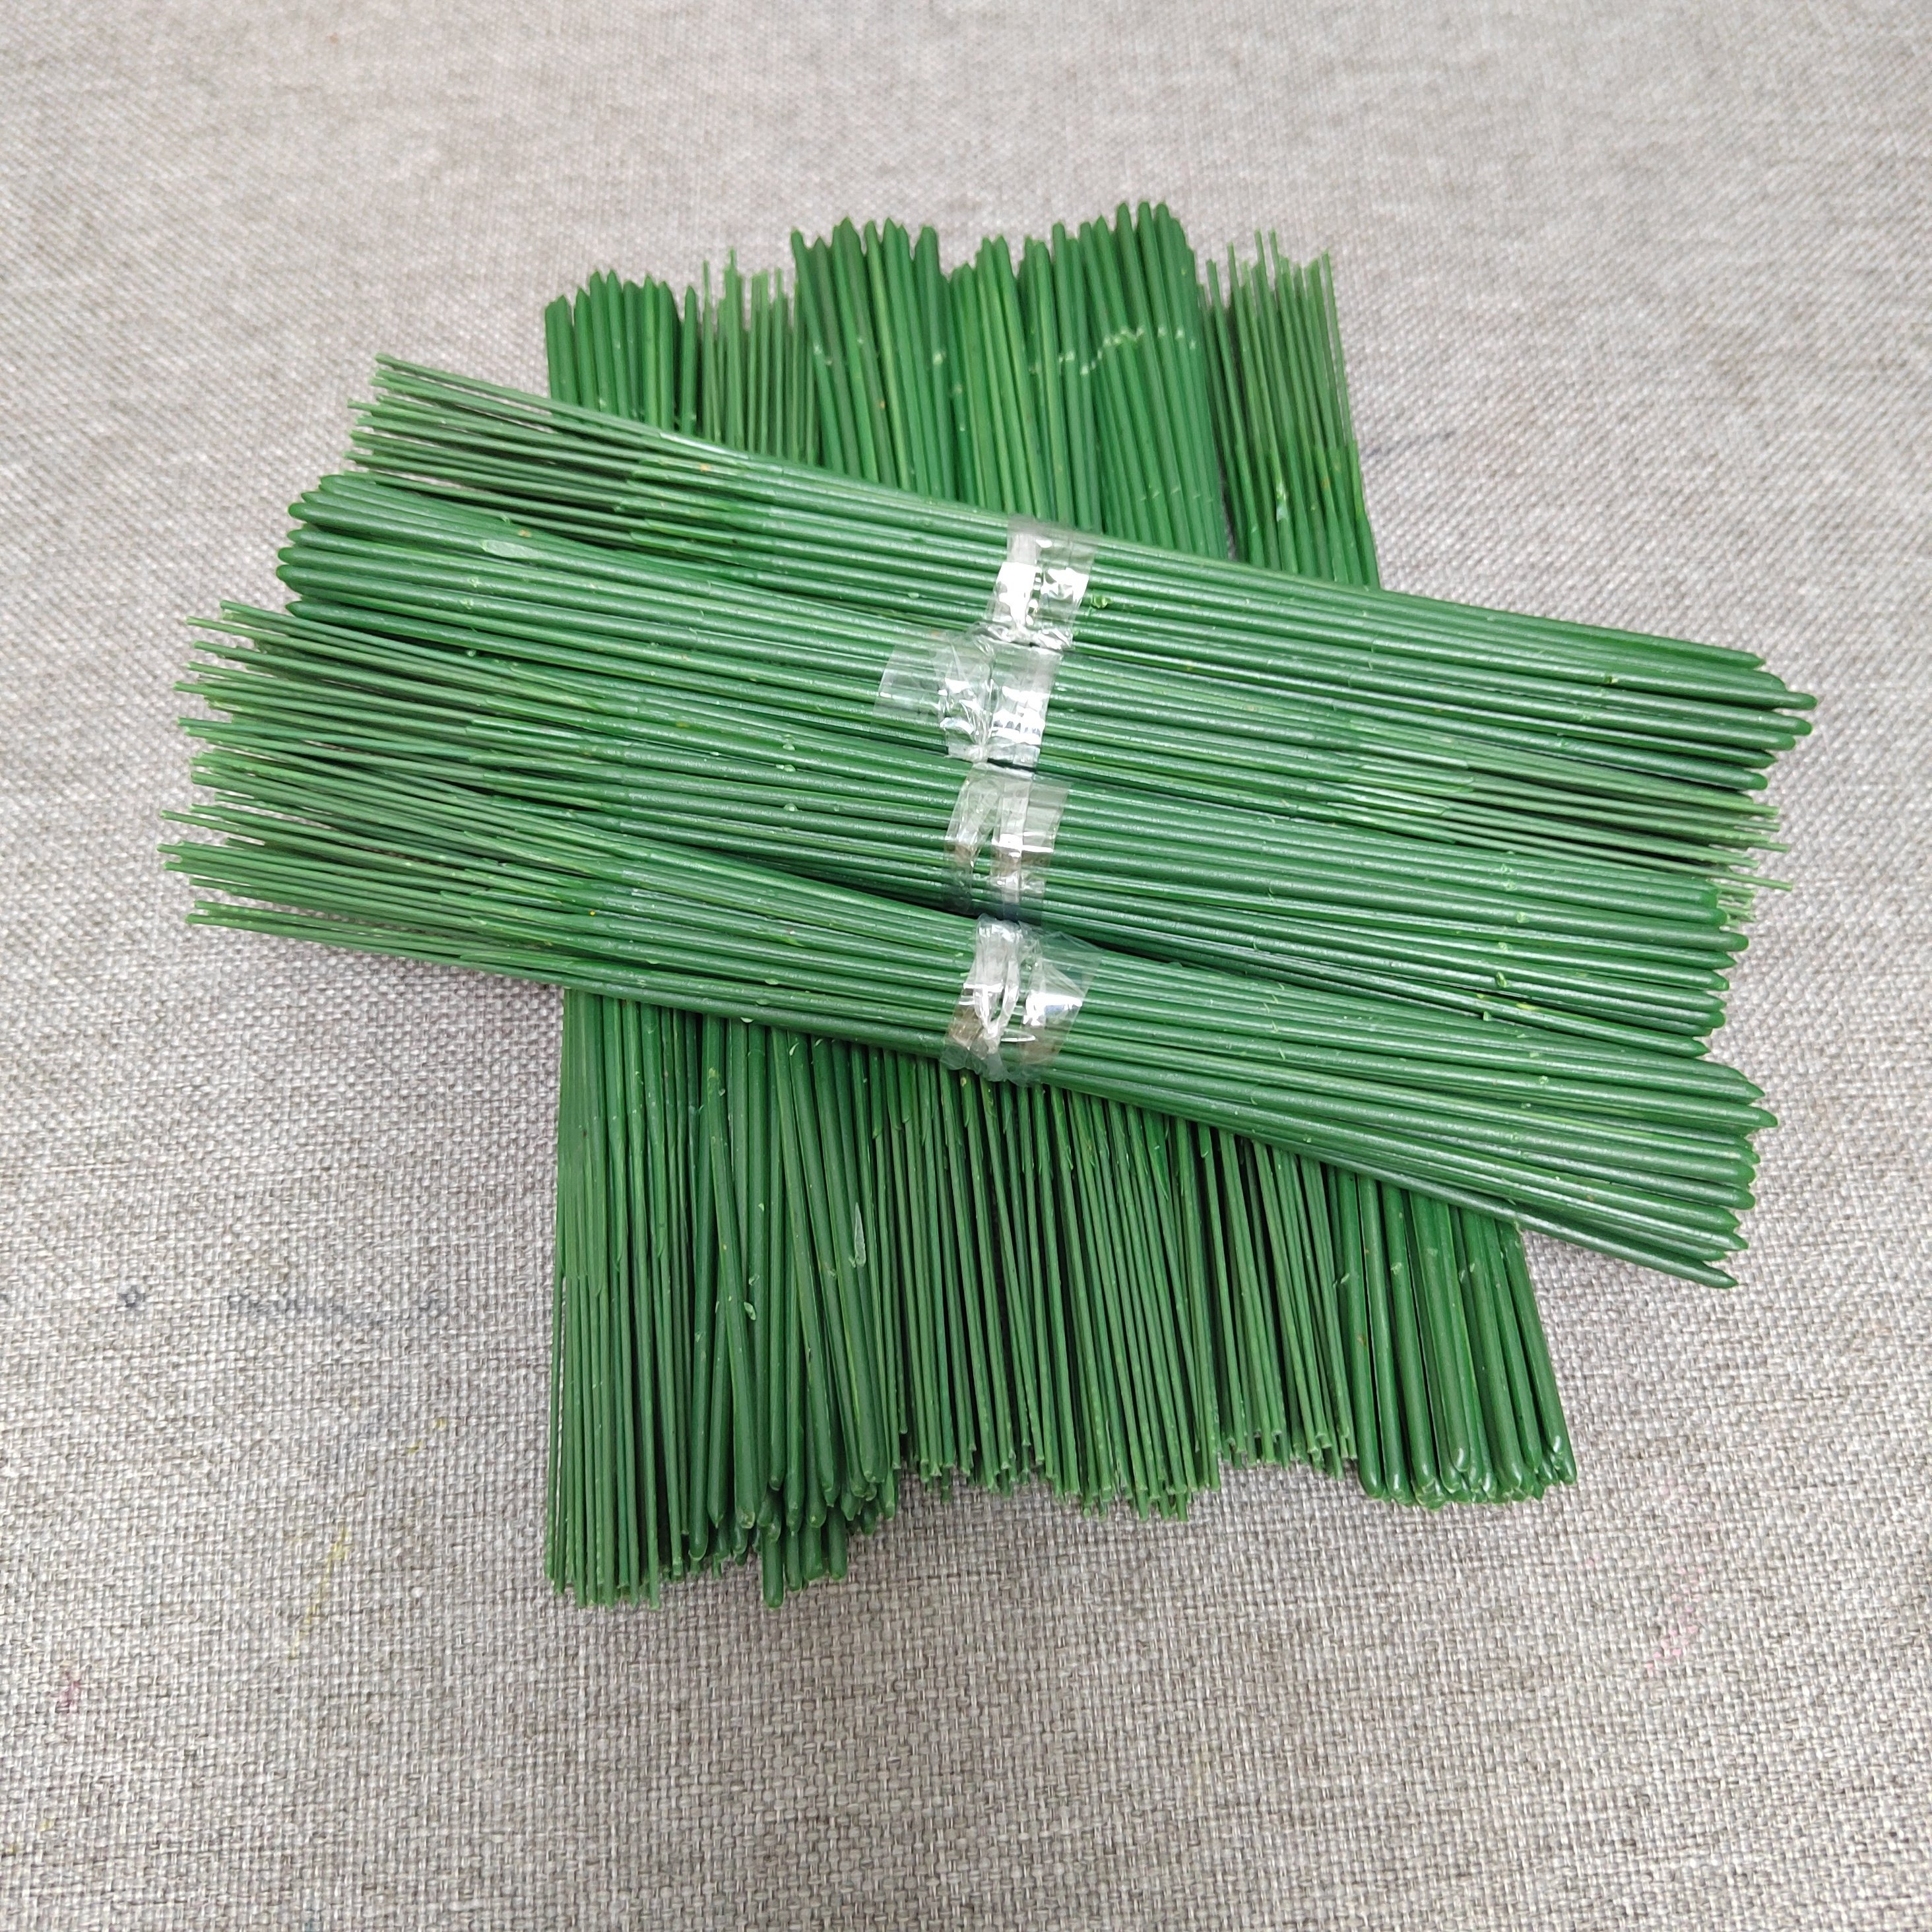 Florist Flower Plastic Wire Rose Stems with LEAVES 2mm Dark Green x 10 pcs